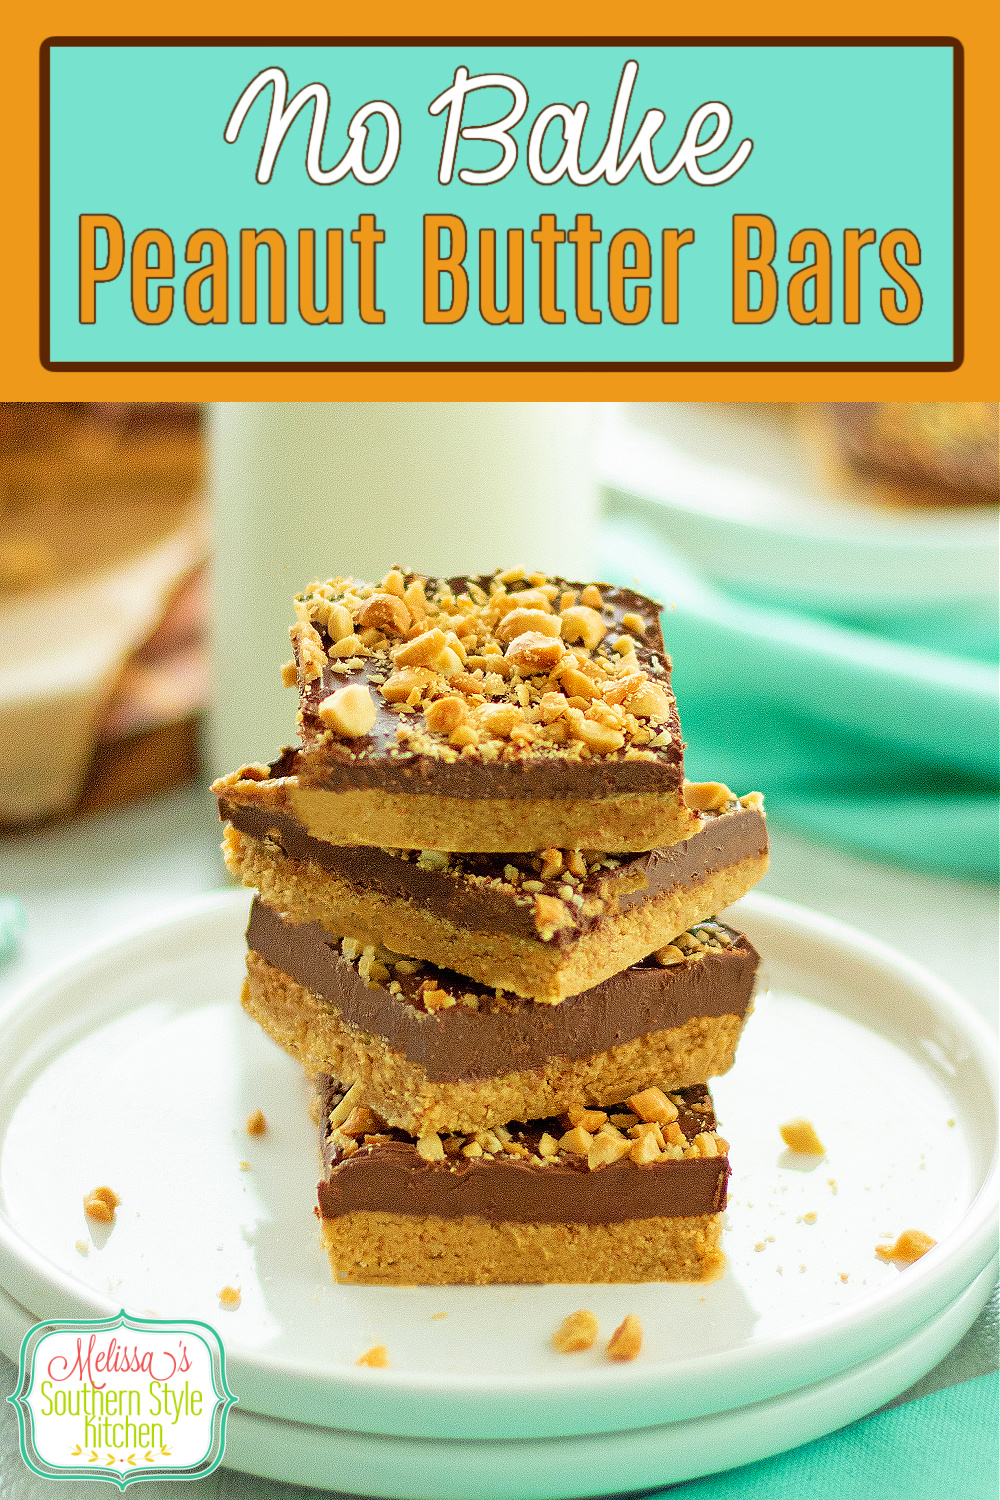 These no bake Peanut Butter Bars are drizzled with a warm chocolate and peanut butter infused topping and sprinkled with chopped peanuts. #peanutbutter #cookiebars #nobakebars #peanutbutterbars #easypeanutbutterbars #holidayrecipes #christmascookierecipes via @melissasssk